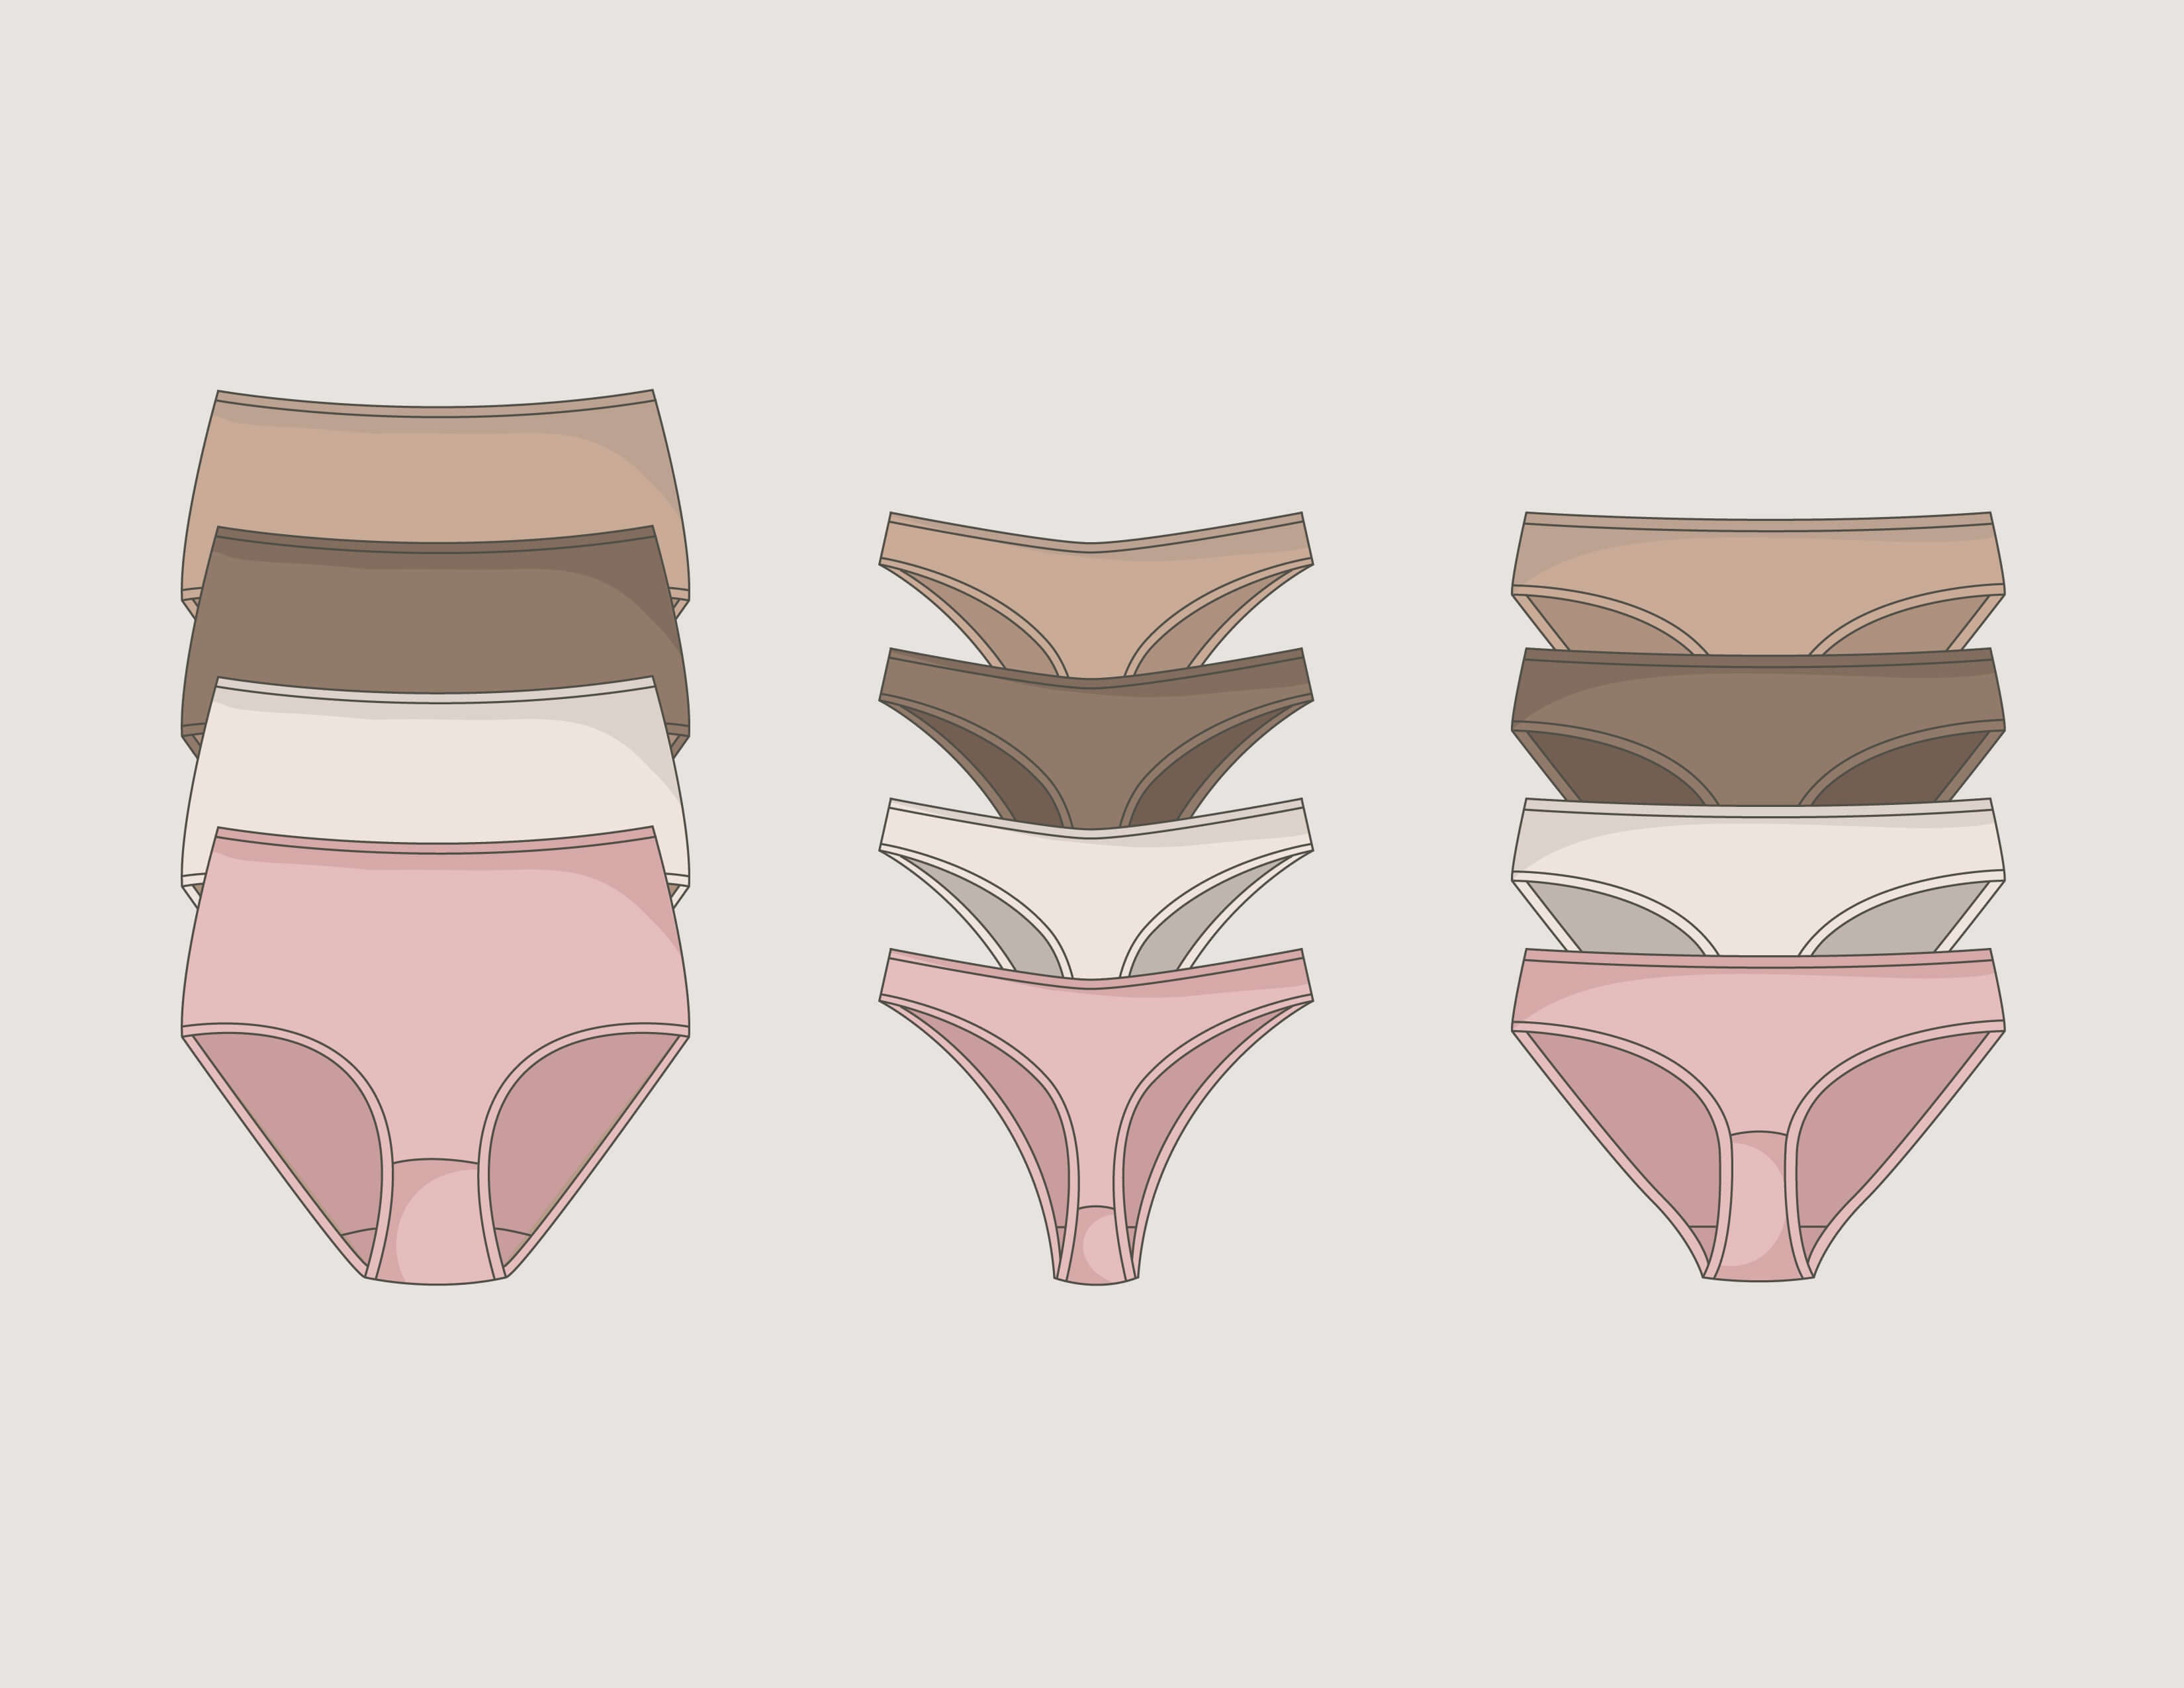 More than Style: Why the Right Women's Underwear is a Life Level